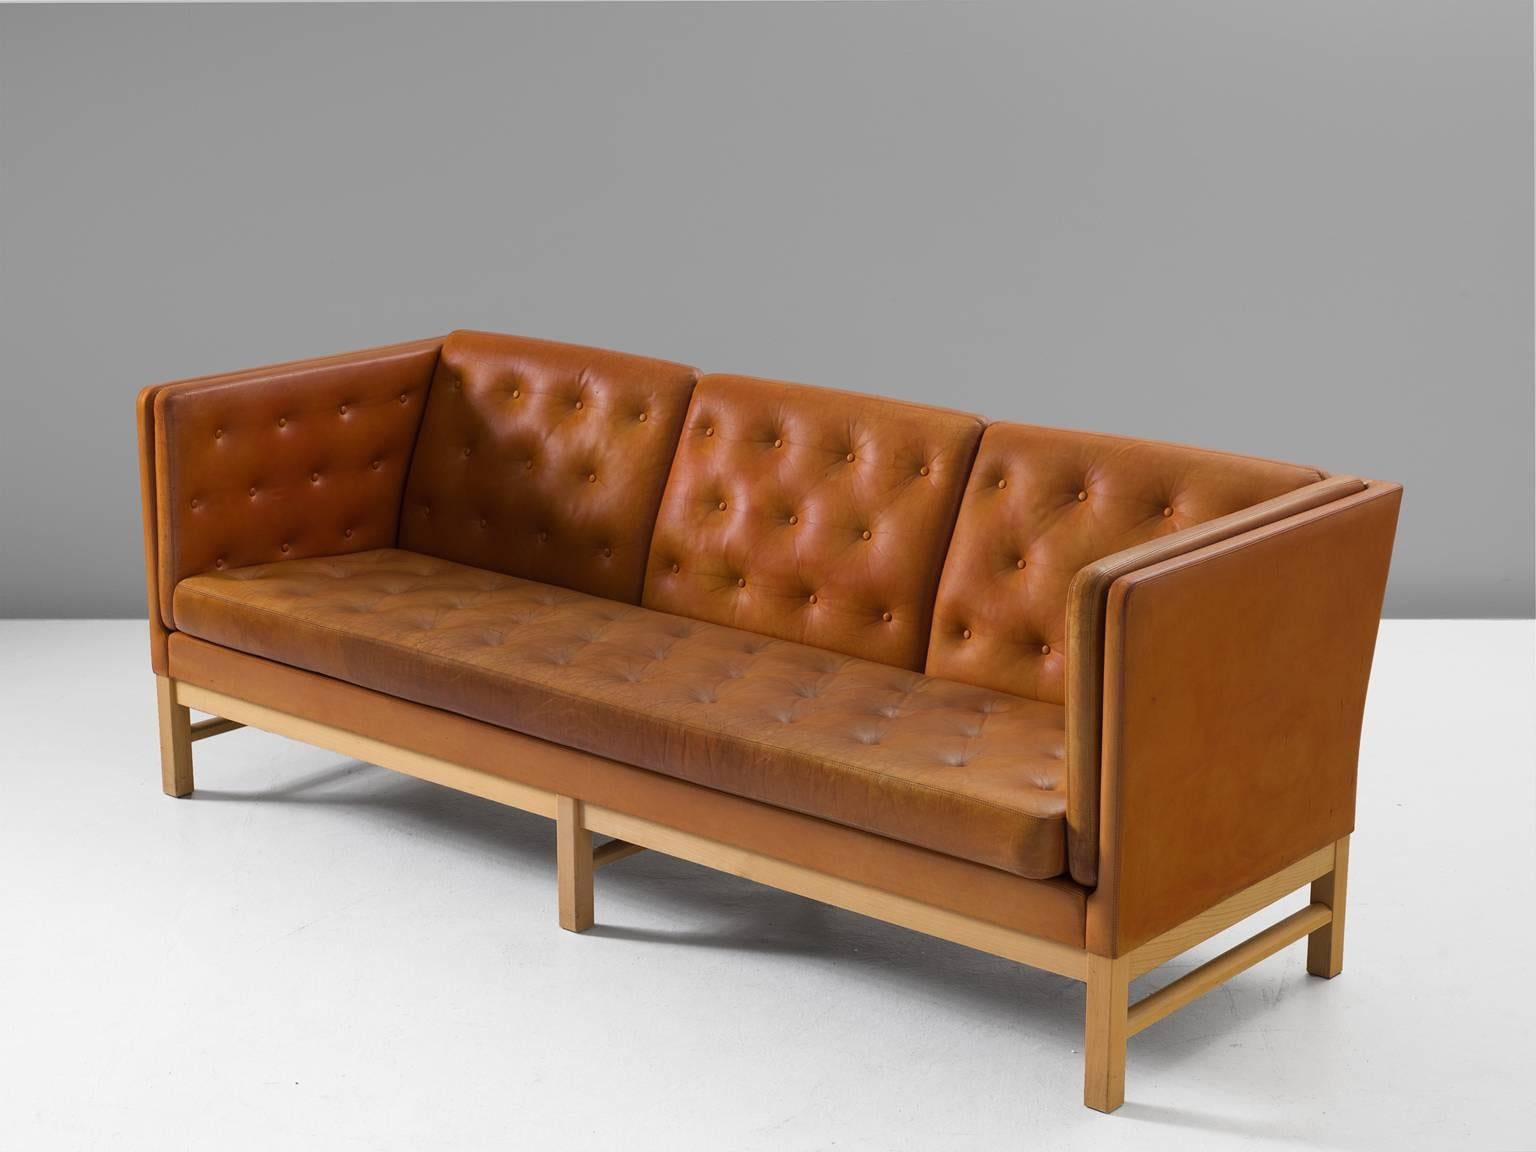 Sofa model EJ 315-3, wood and leather, by Erik Ole Jørgensen for Erik Jorgensen Møbelfabrik, Denmark, 1972. 

Elegant three-seat sofa by Erik Ole Jørgensen. This sofa has a luxurious appearance due to the tufted cognac leather. The orderly placed